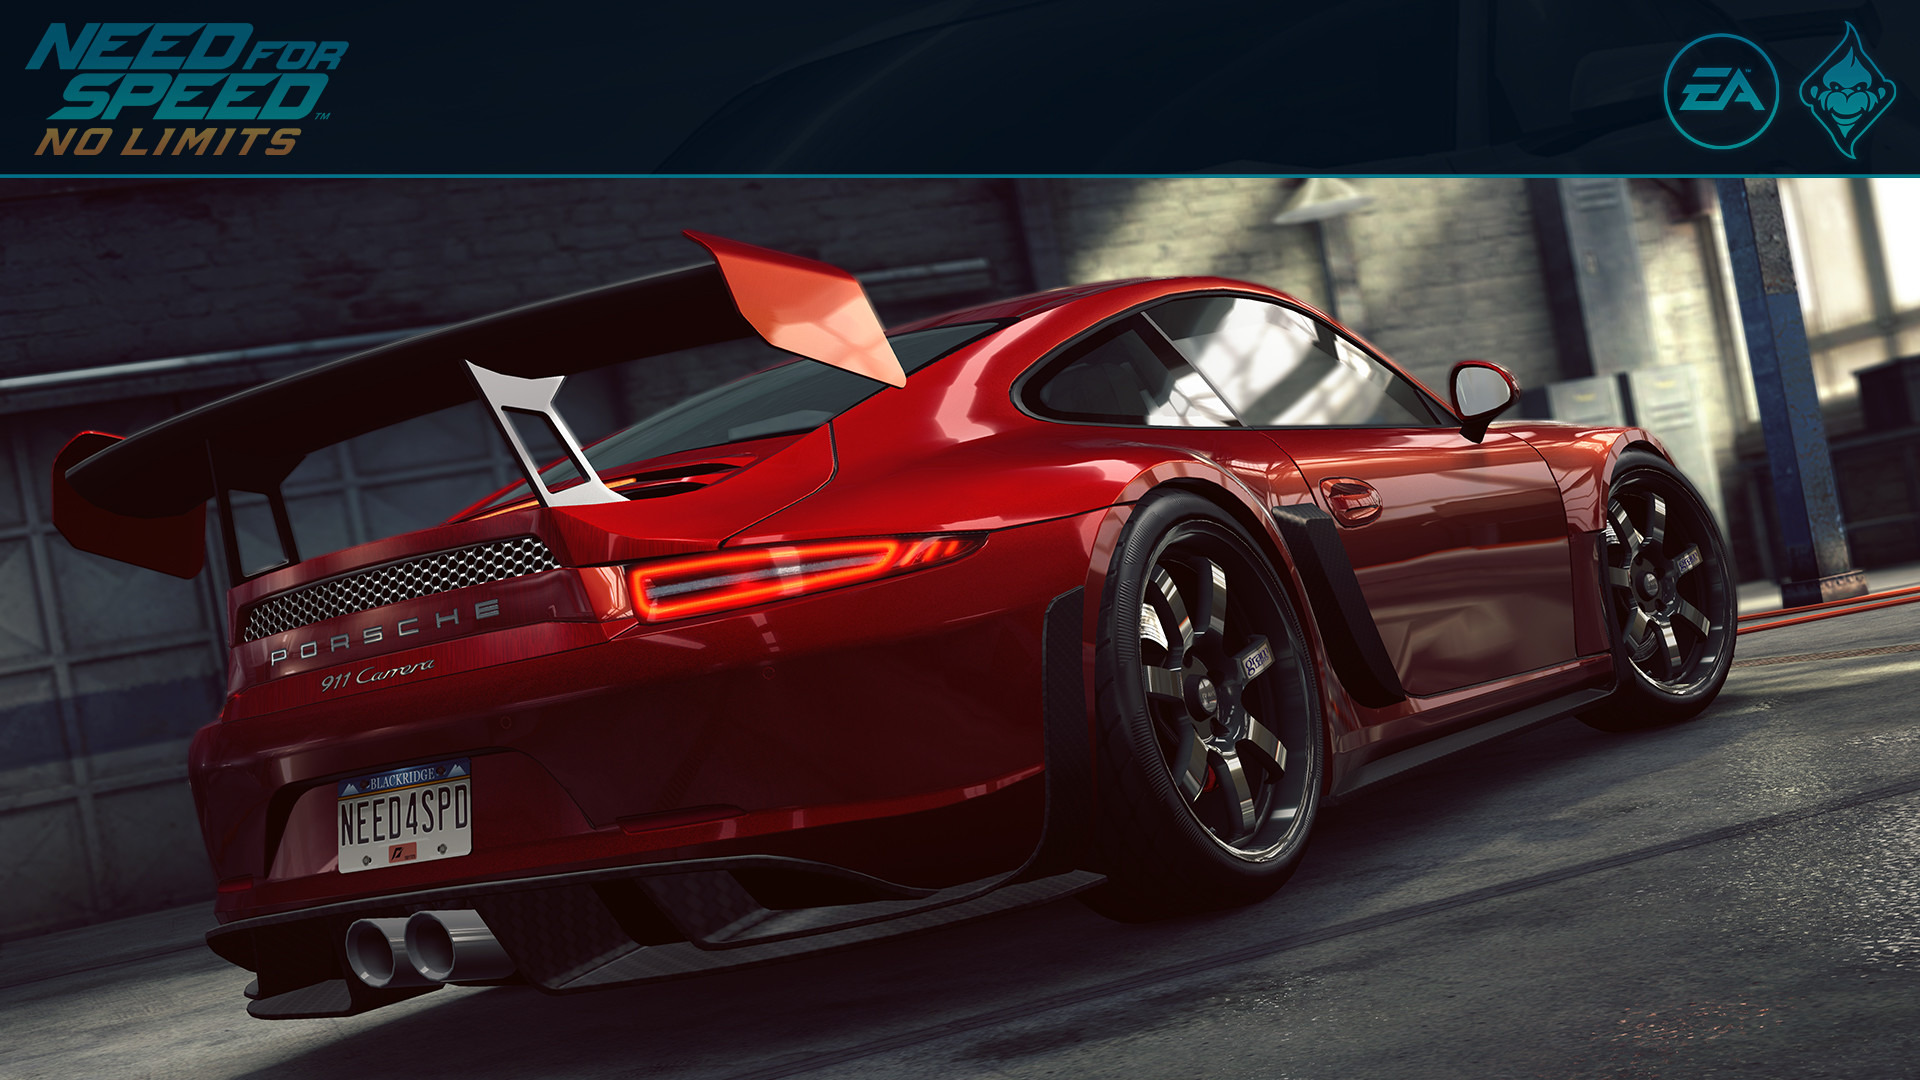 need for speed porsche unleashed pc